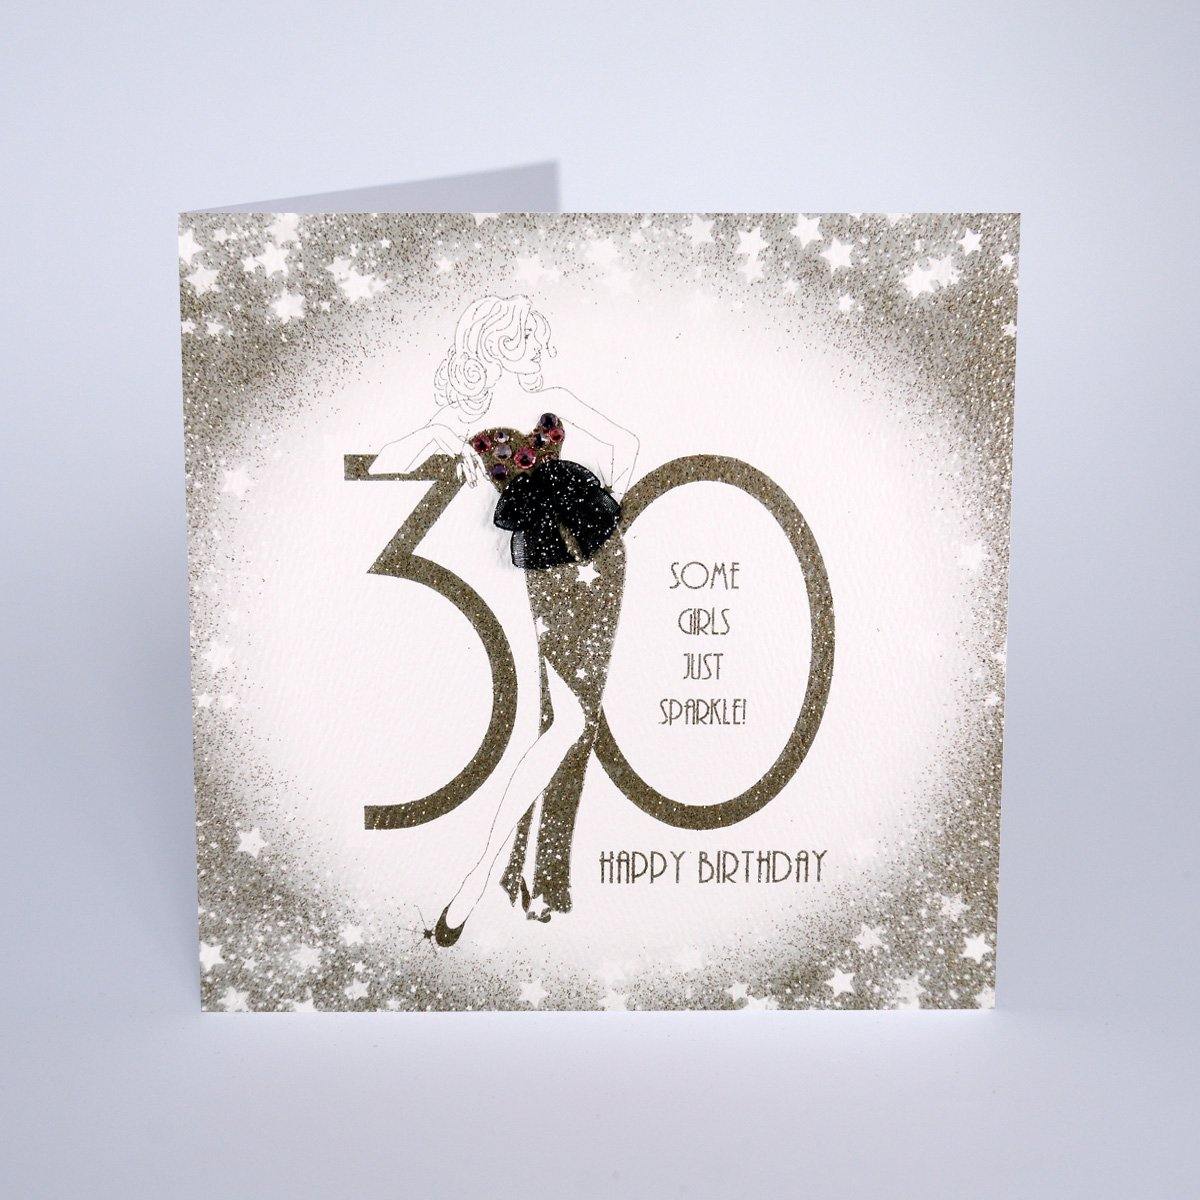 30 - Some Girls Just Sparkle - Birthday Card - TwoBeeps.co.uk